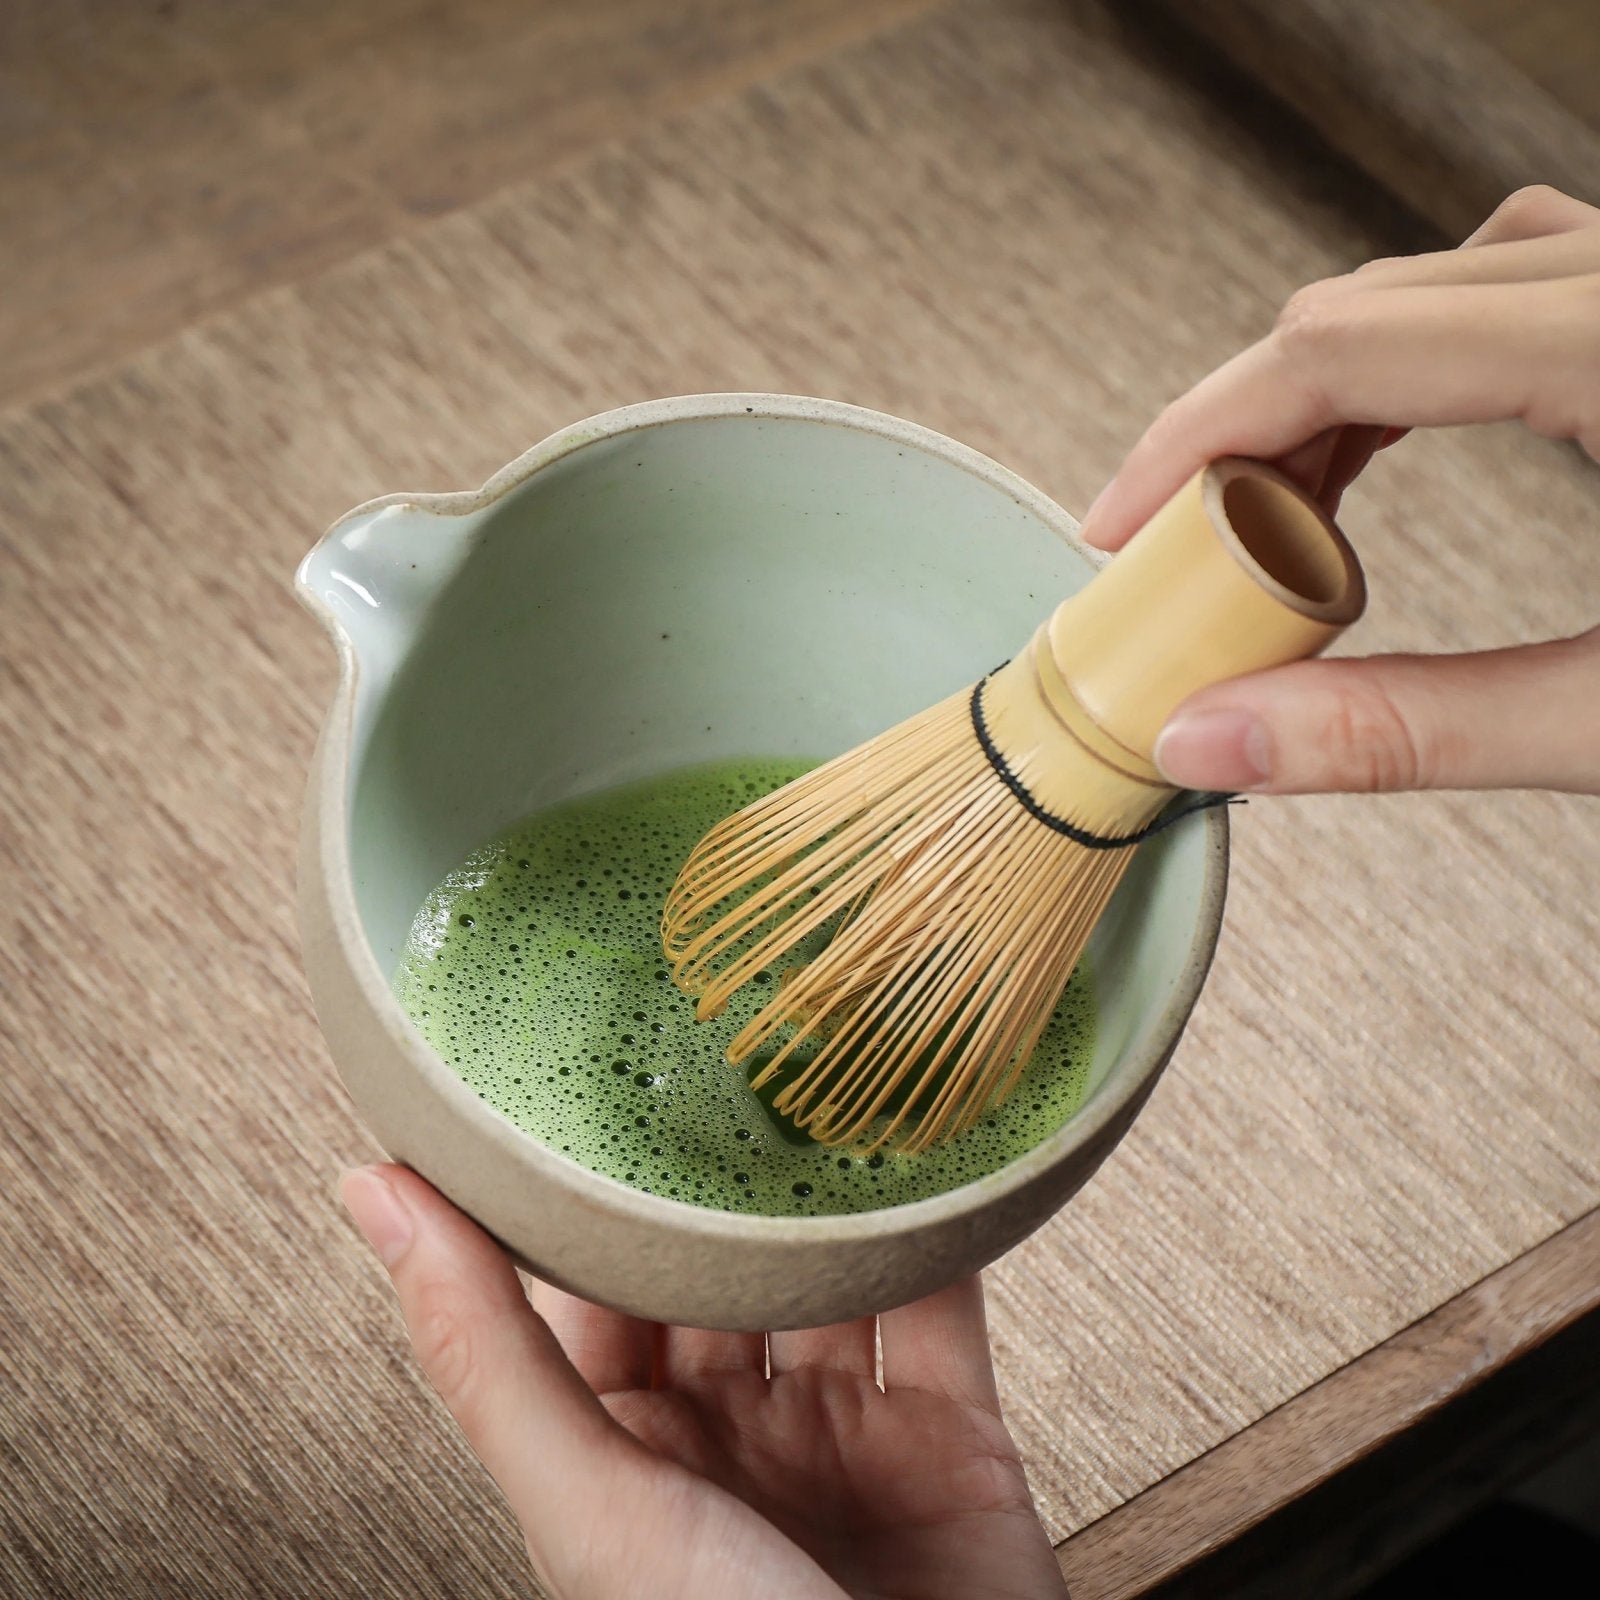 Japanese Matcha Ceremony Set, 8pcs/set with Paper Hand-Book, Bowl with Pouring Spout - TEANAGOO